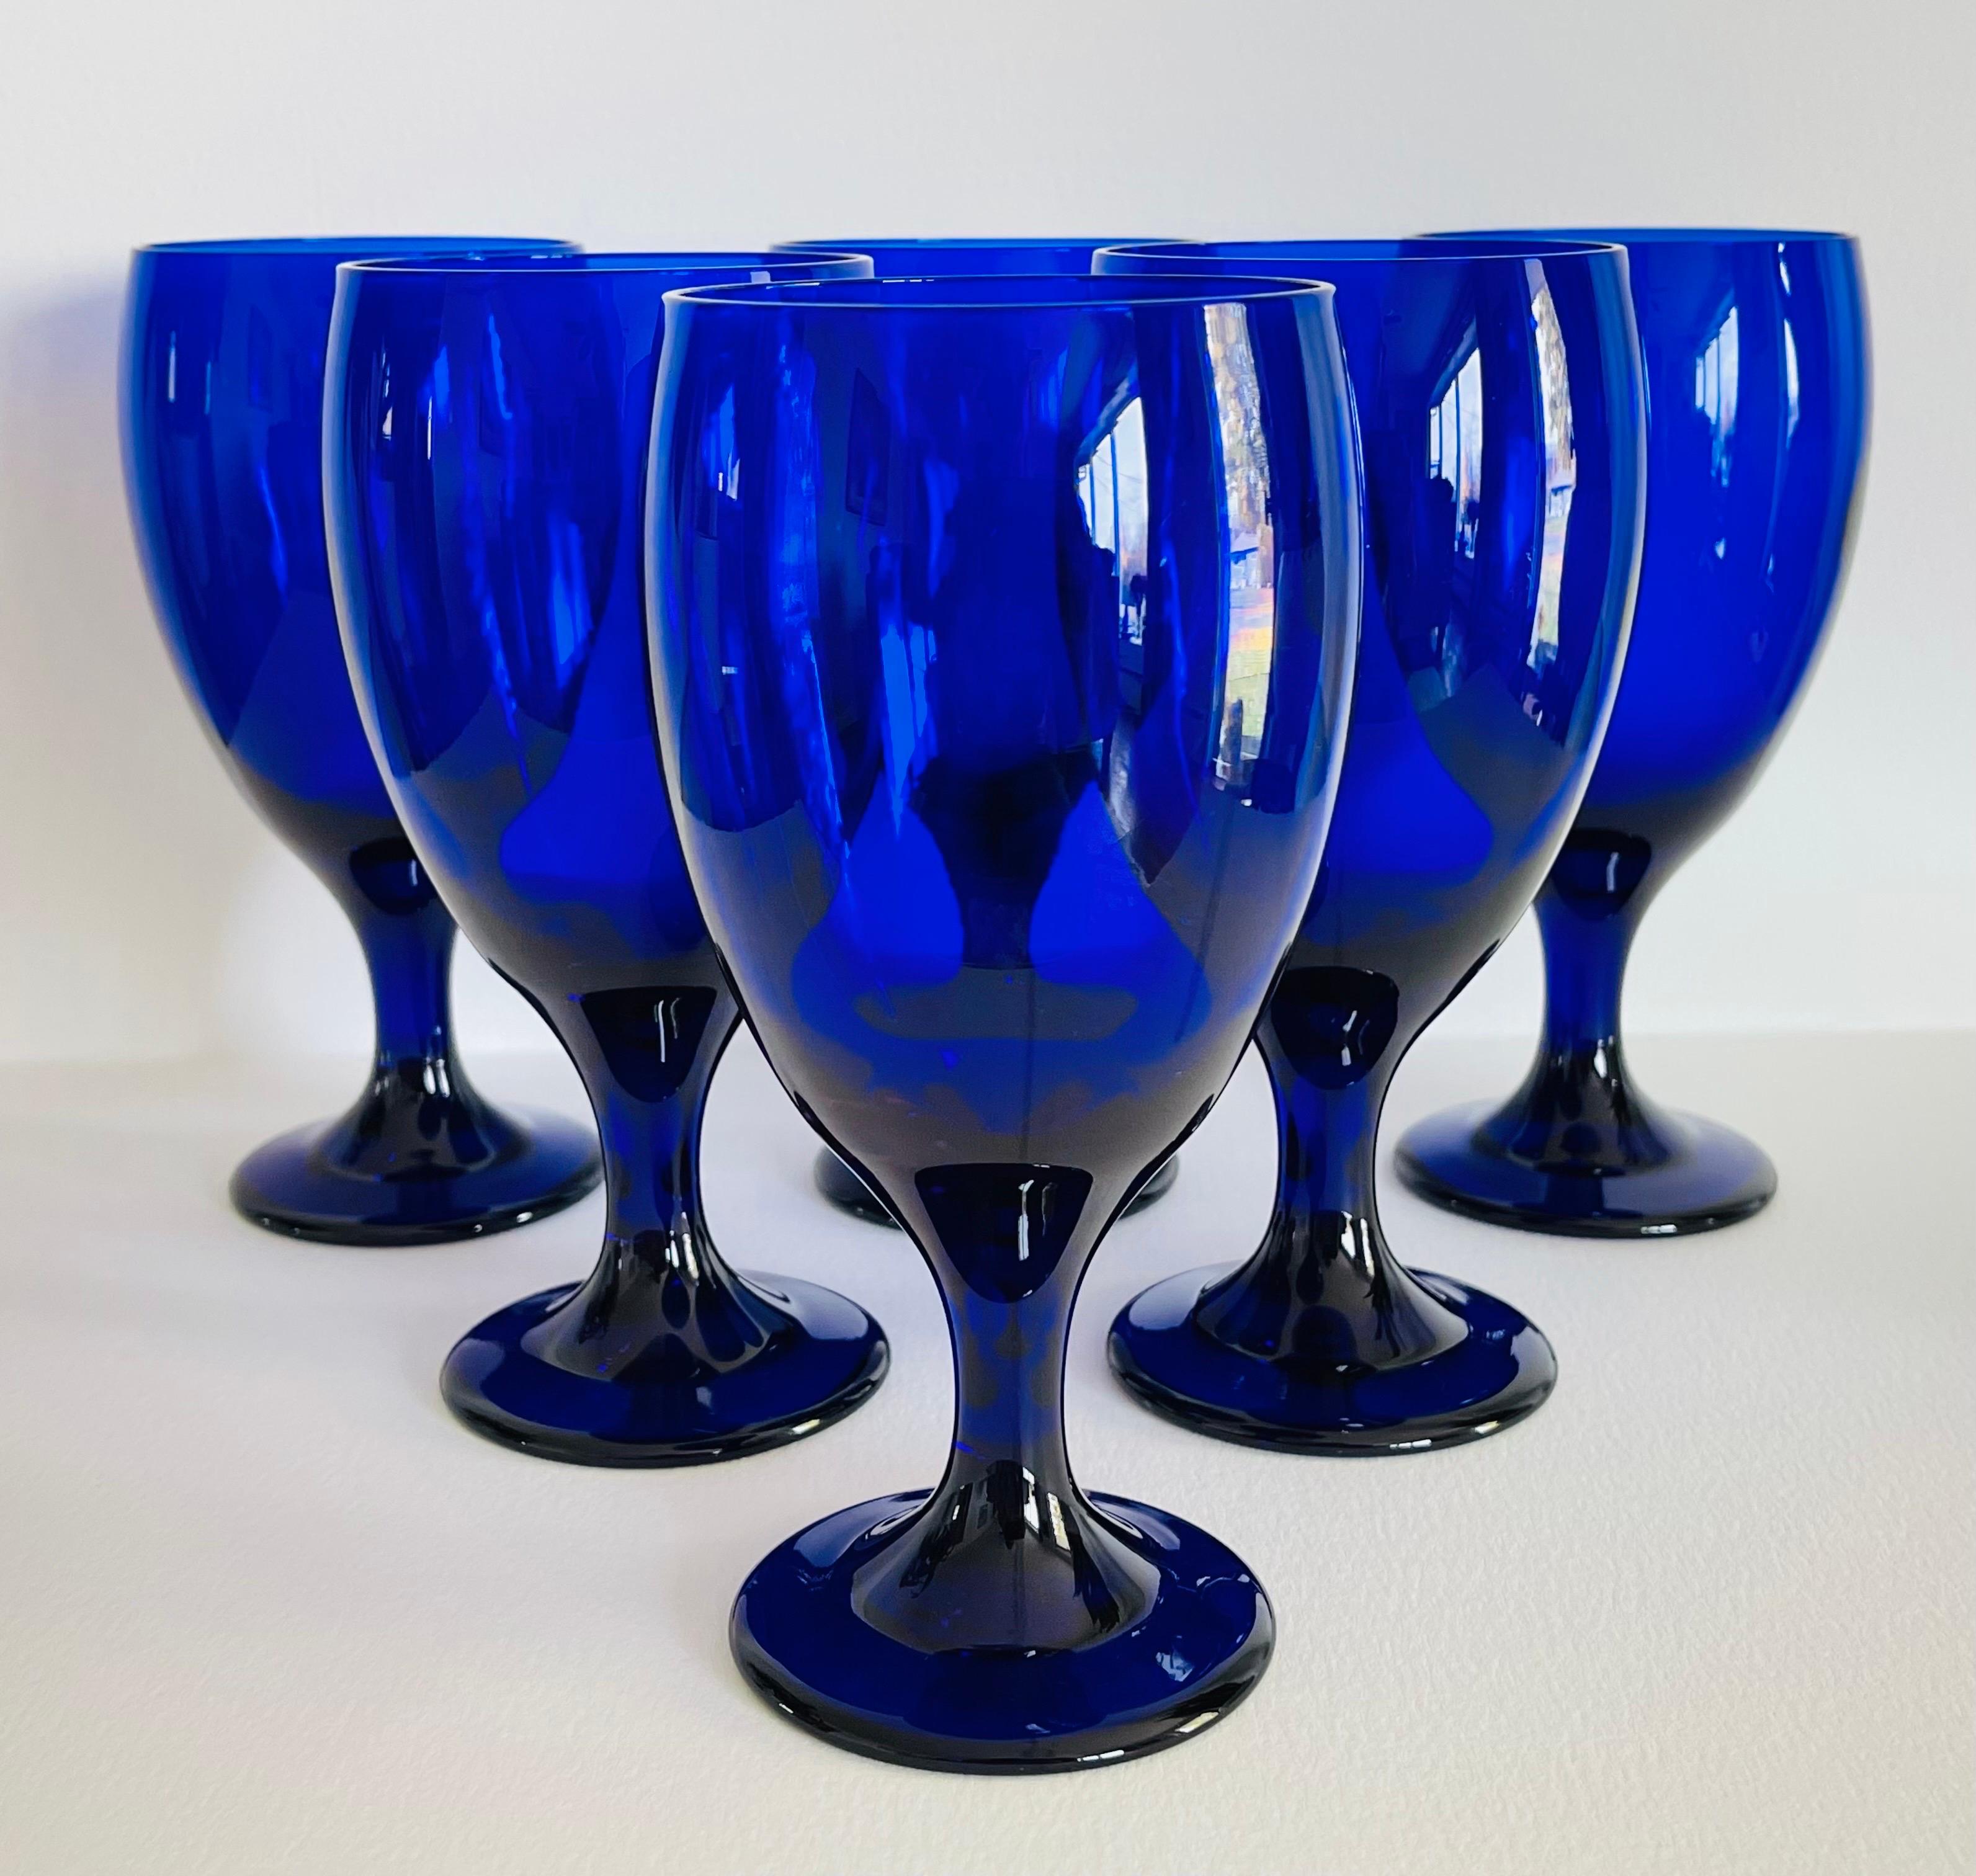 Vintage 1970s set of six tall cobalt glass goblets. The goblets can be used for either wine or water. No marks.